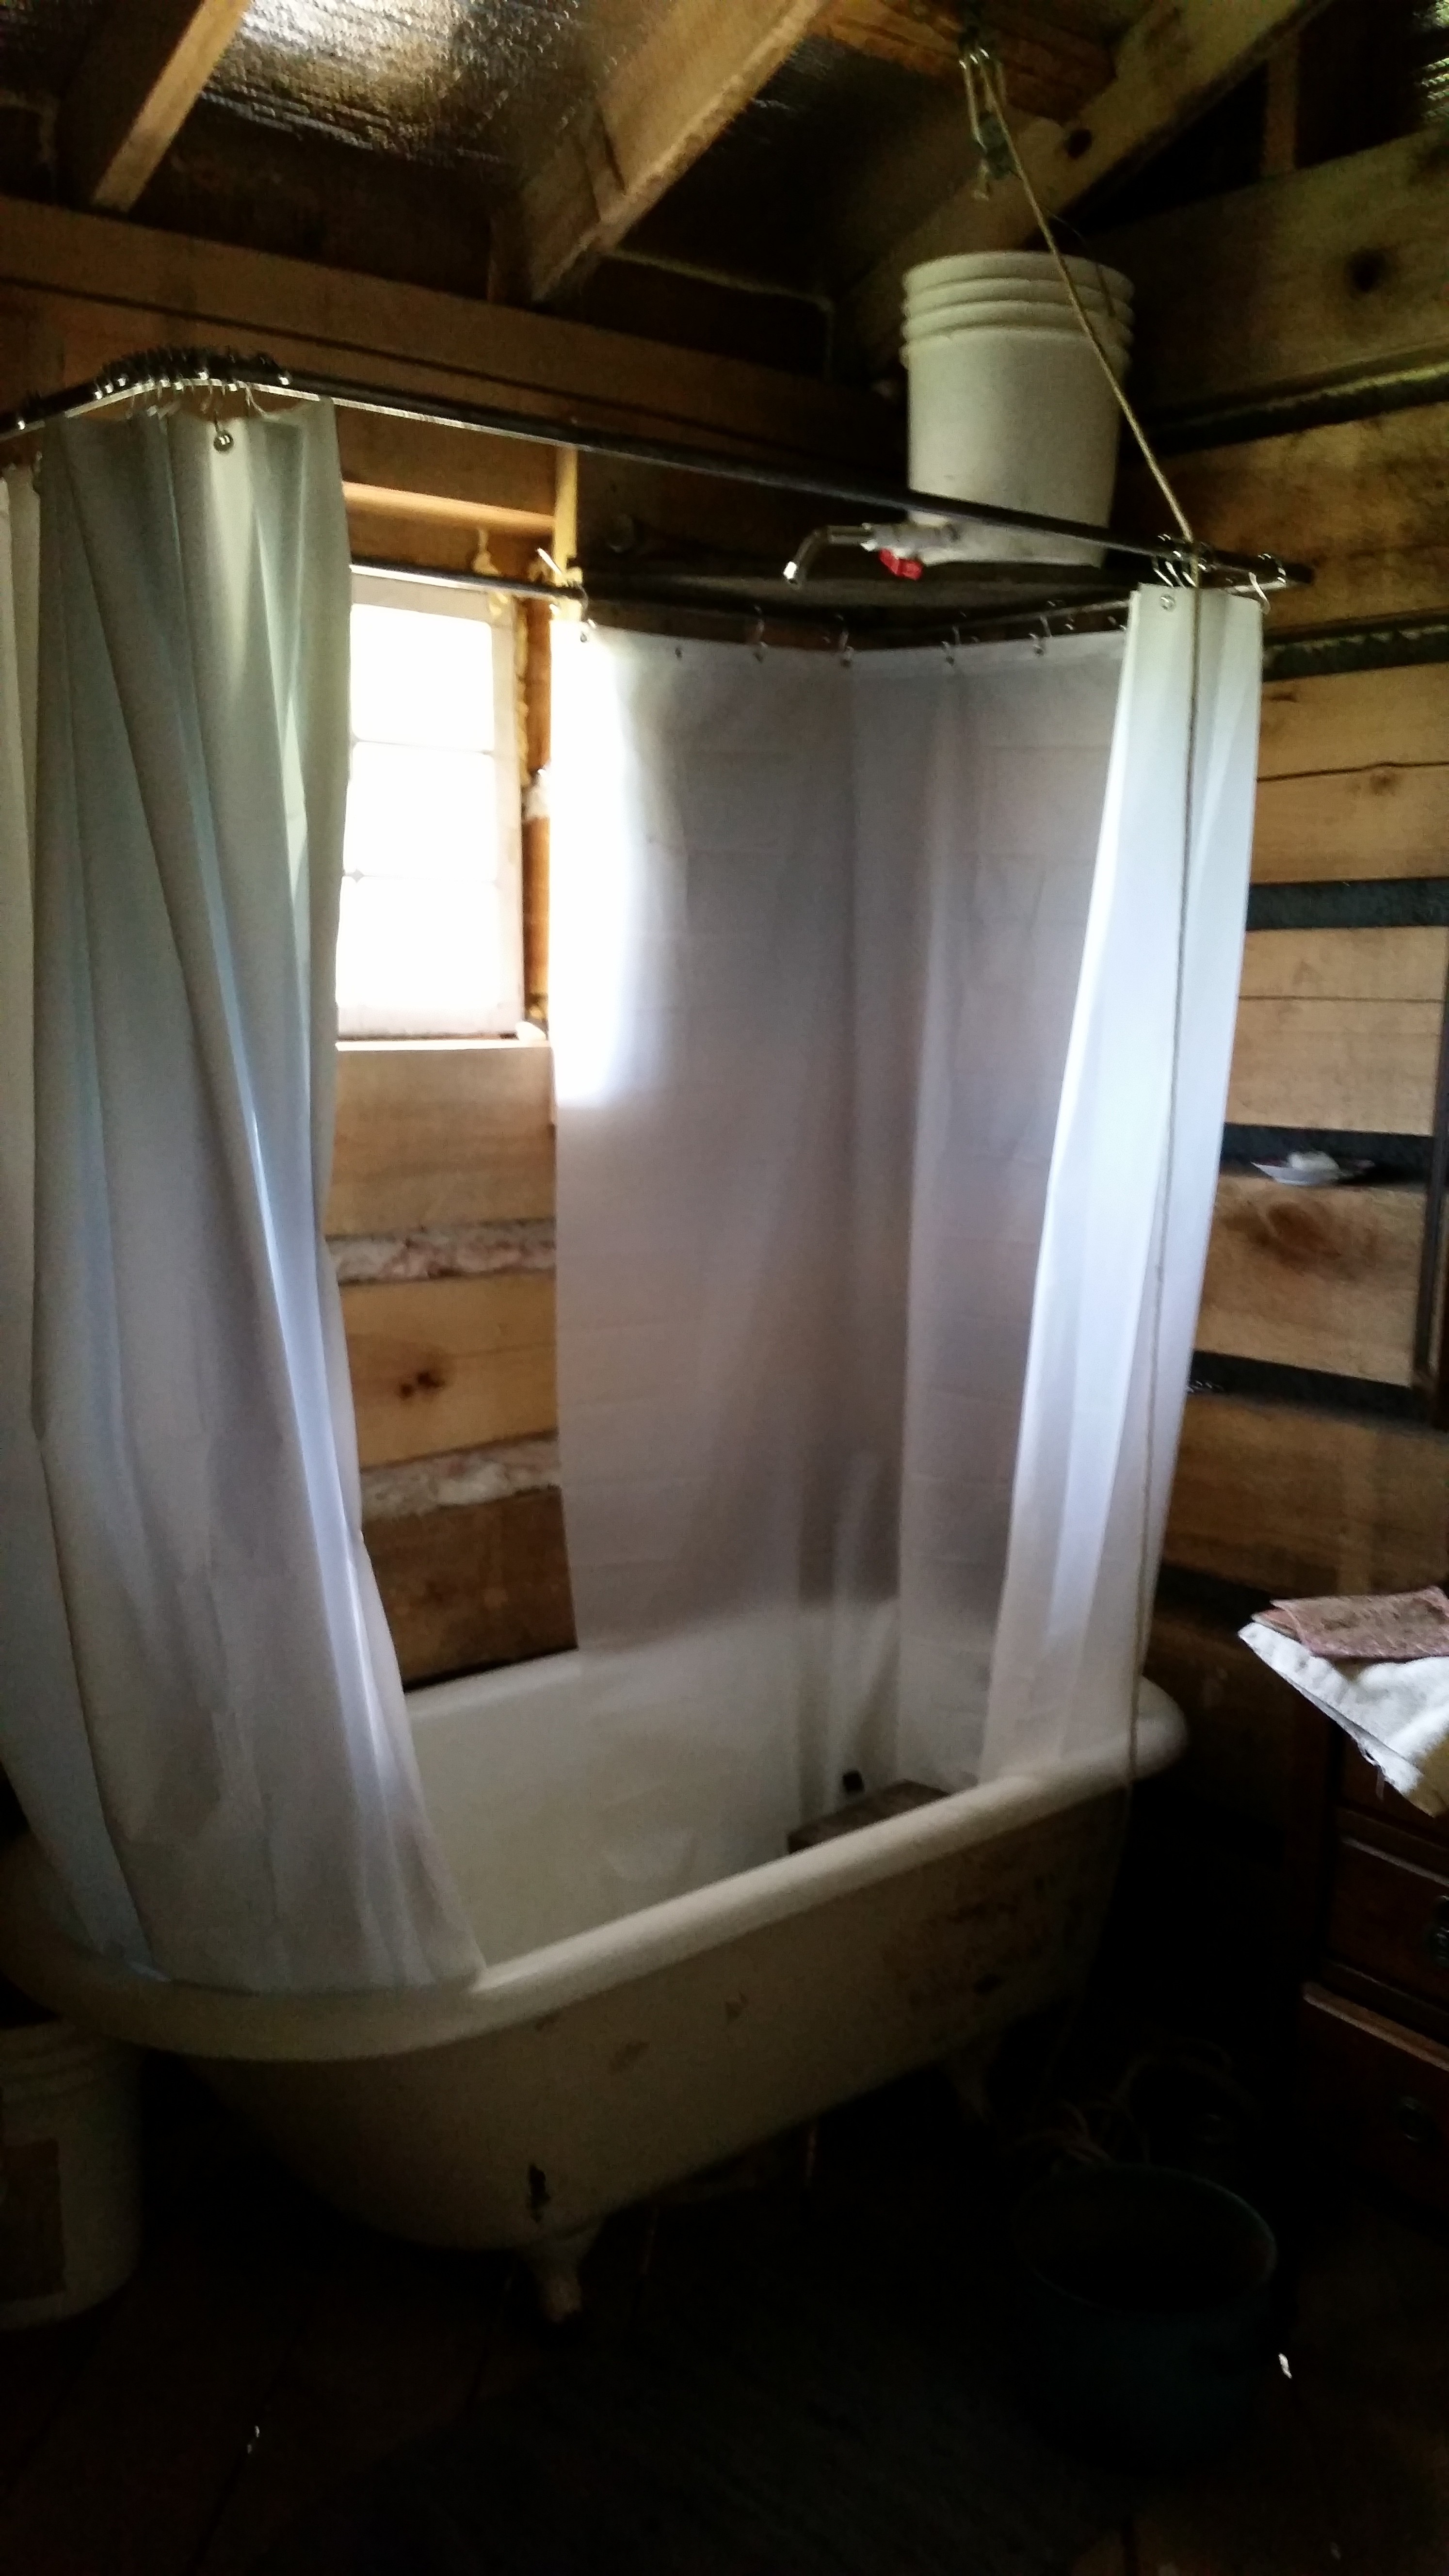 Shower-in-a-Bucket : 7 Steps - Instructables